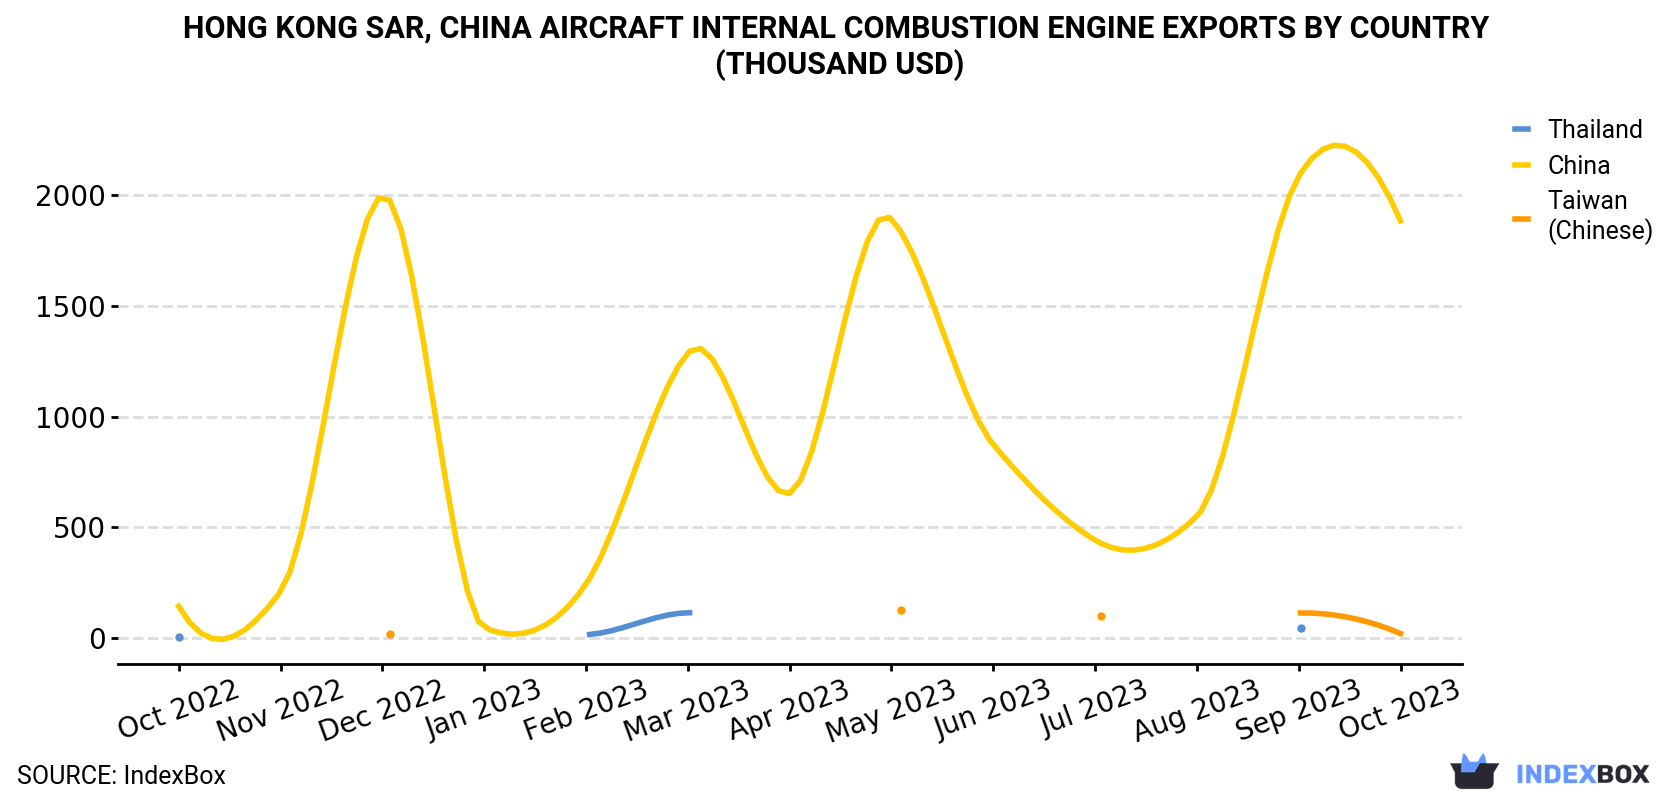 Hong Kong Aircraft Internal Combustion Engine Exports By Country (Thousand USD)